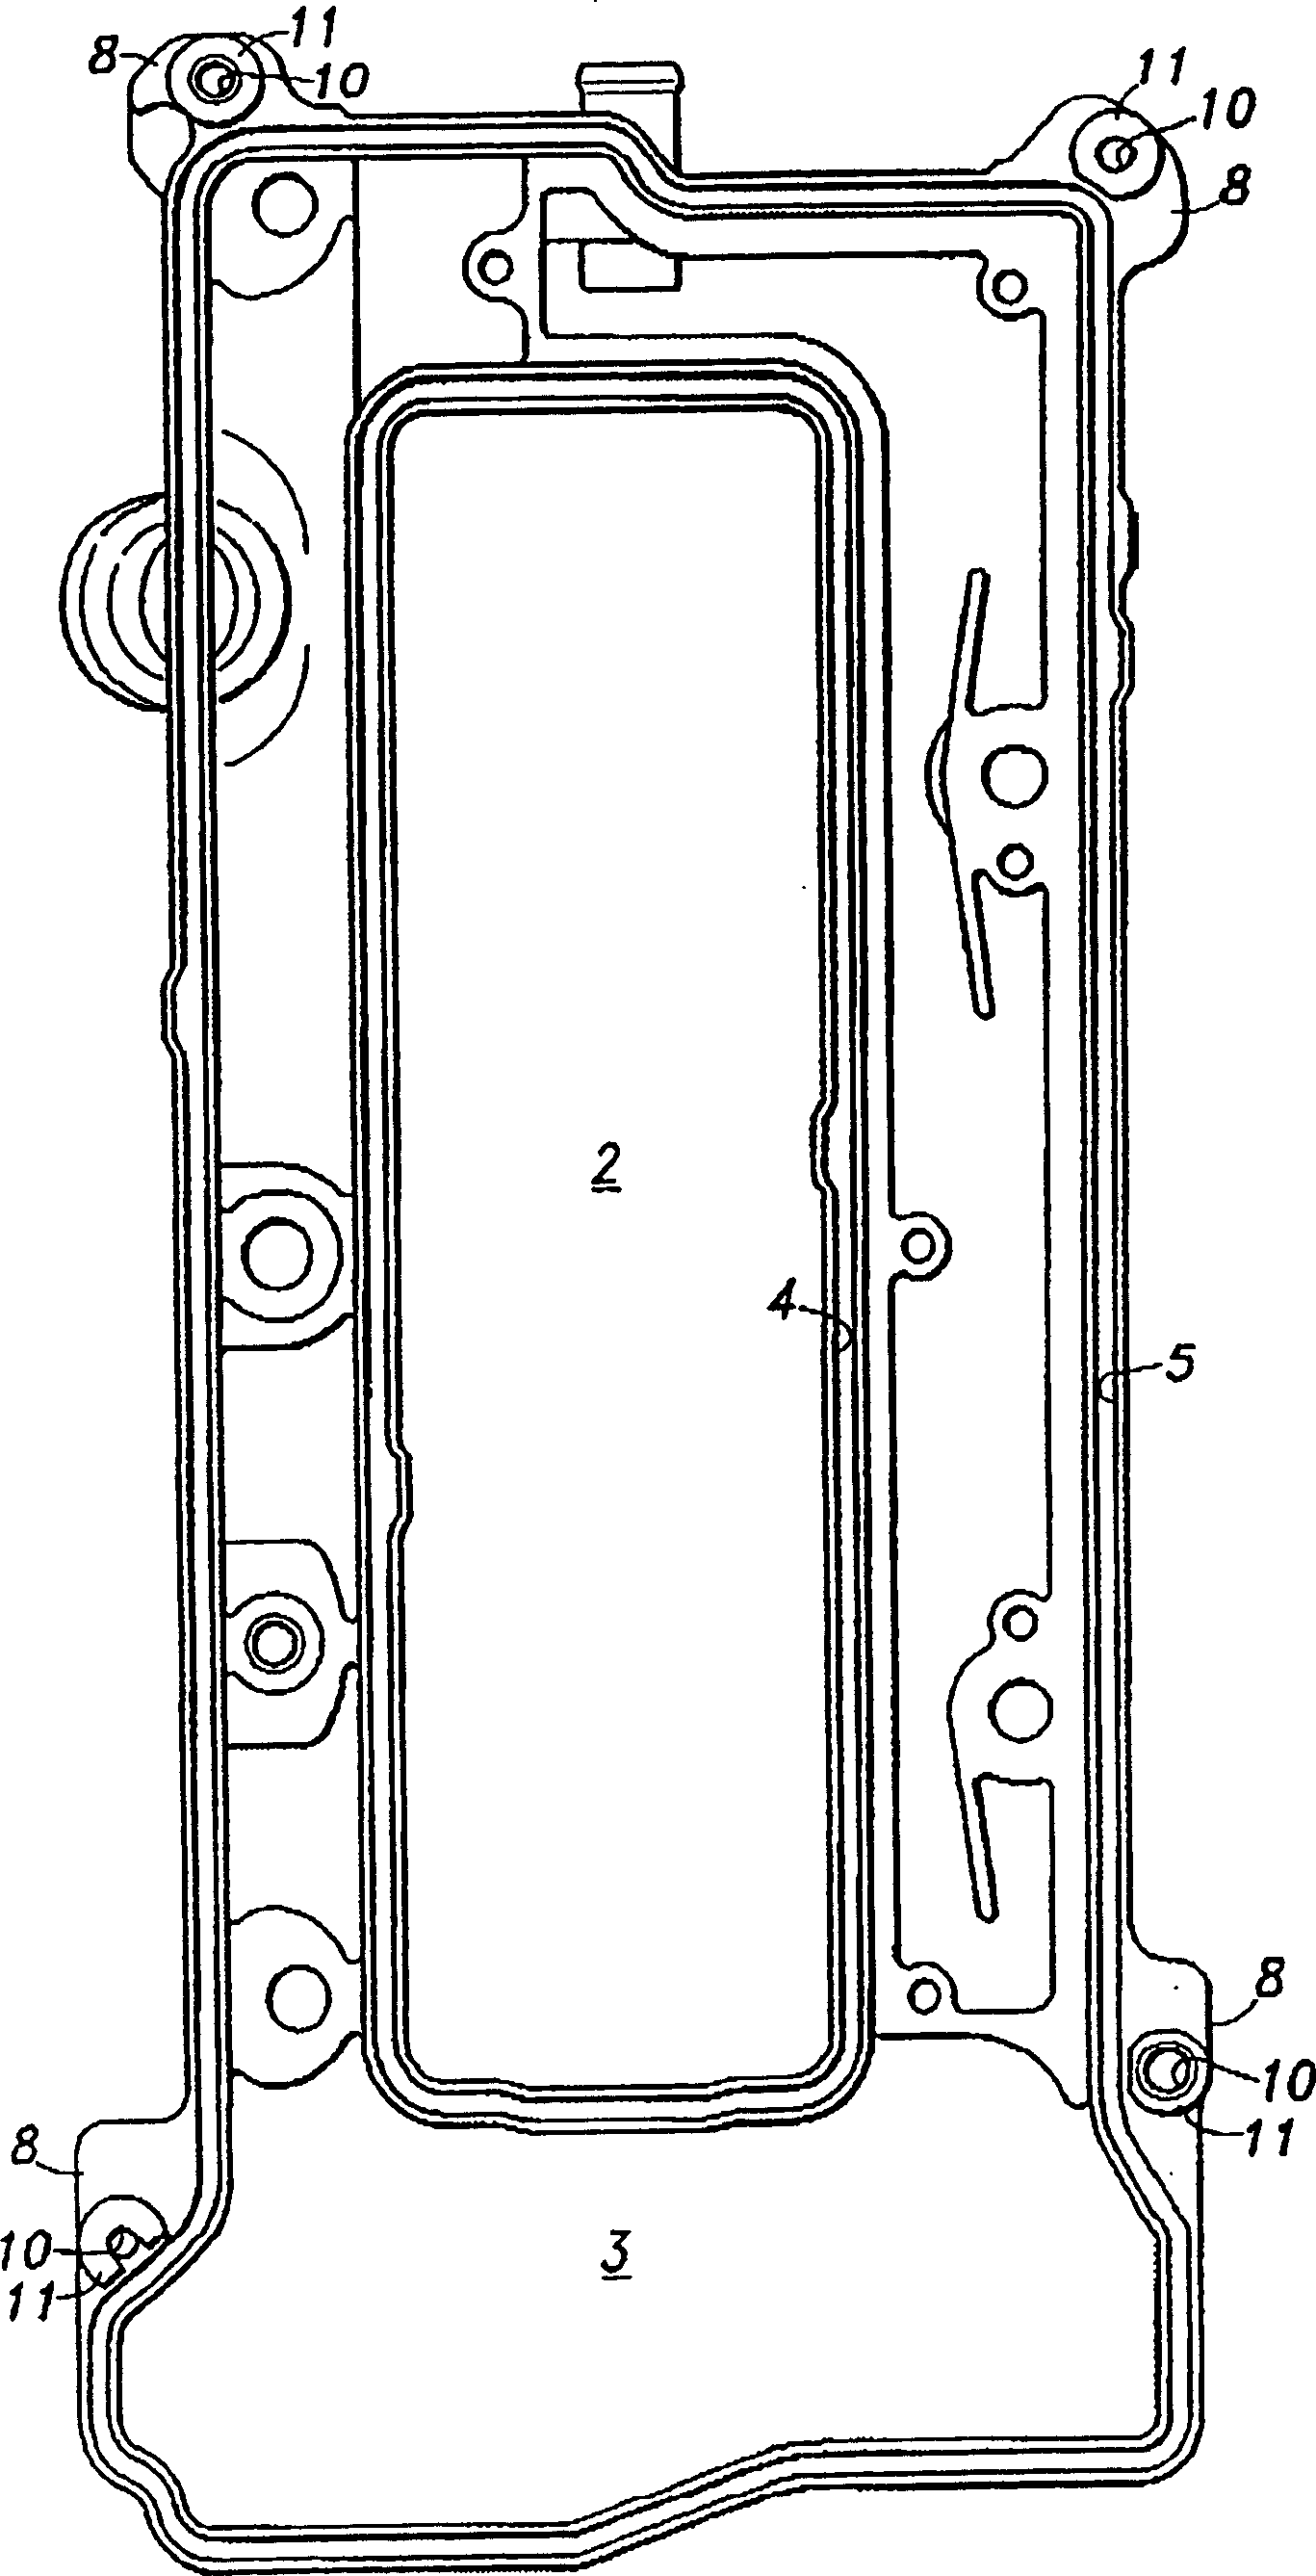 Cylinder cover of internal combustion engine